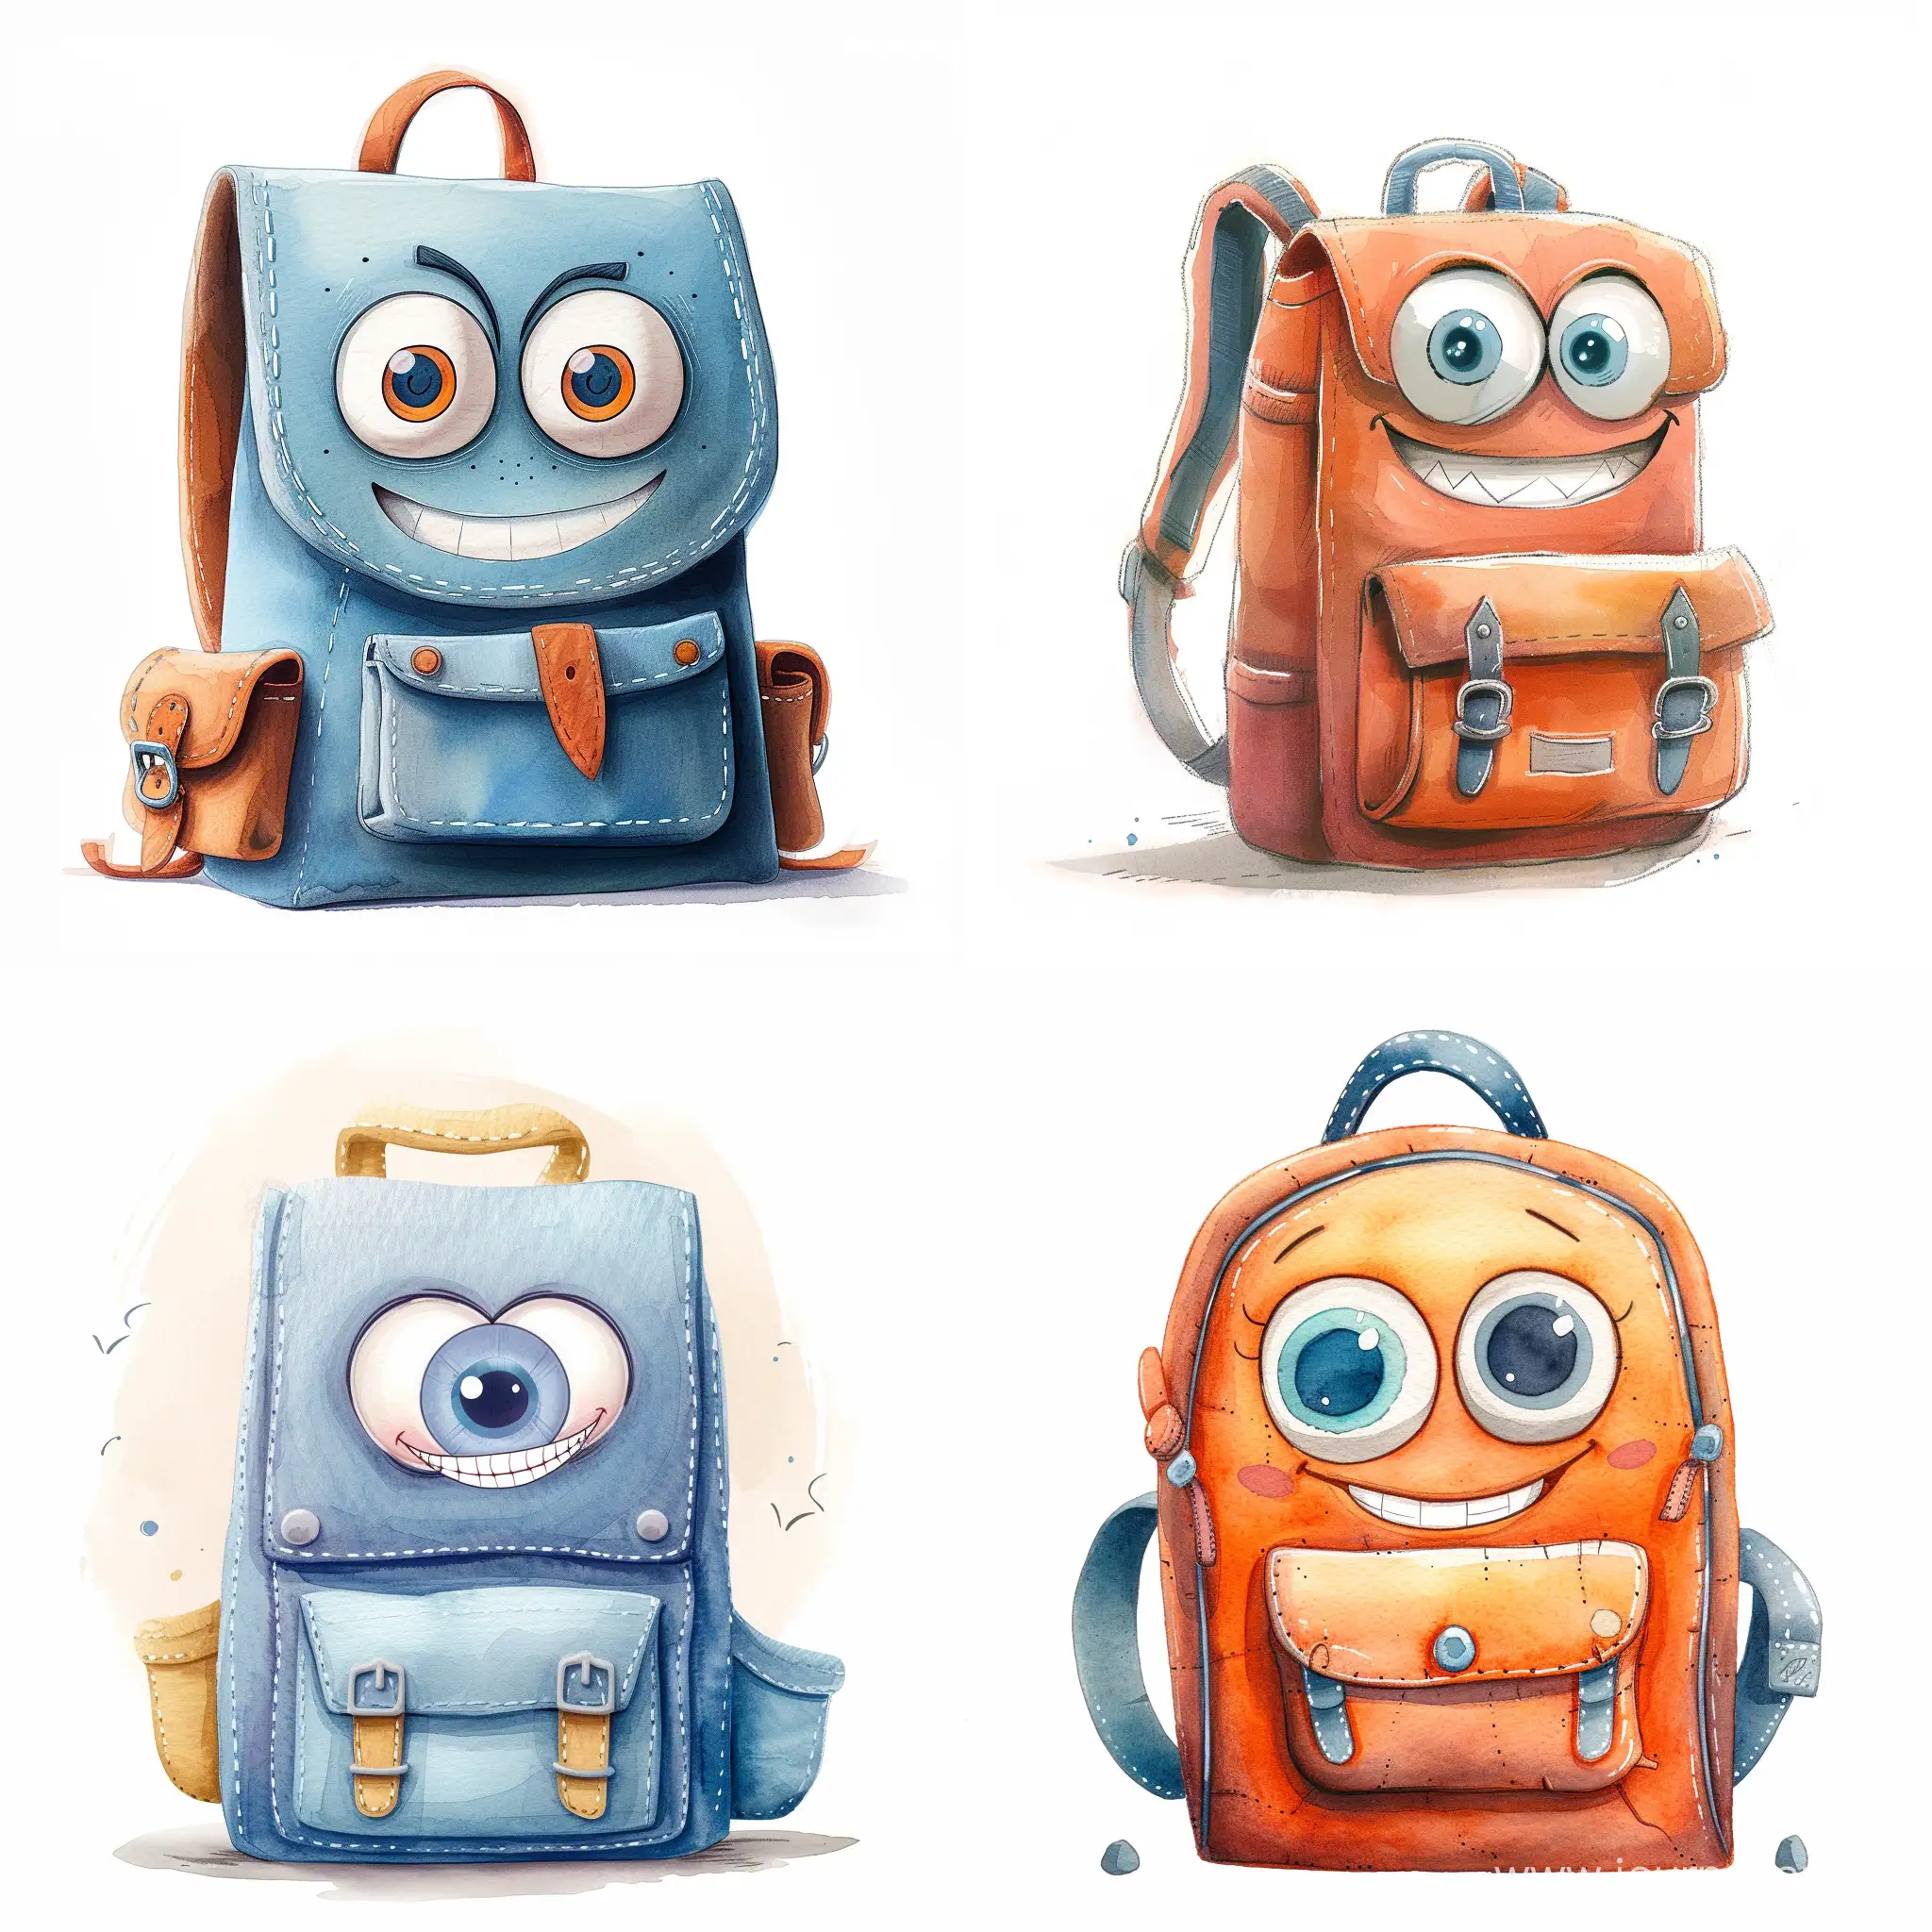 Cheerful-Cartoon-Backpack-with-Big-Eyes-in-2D-Watercolor-Style